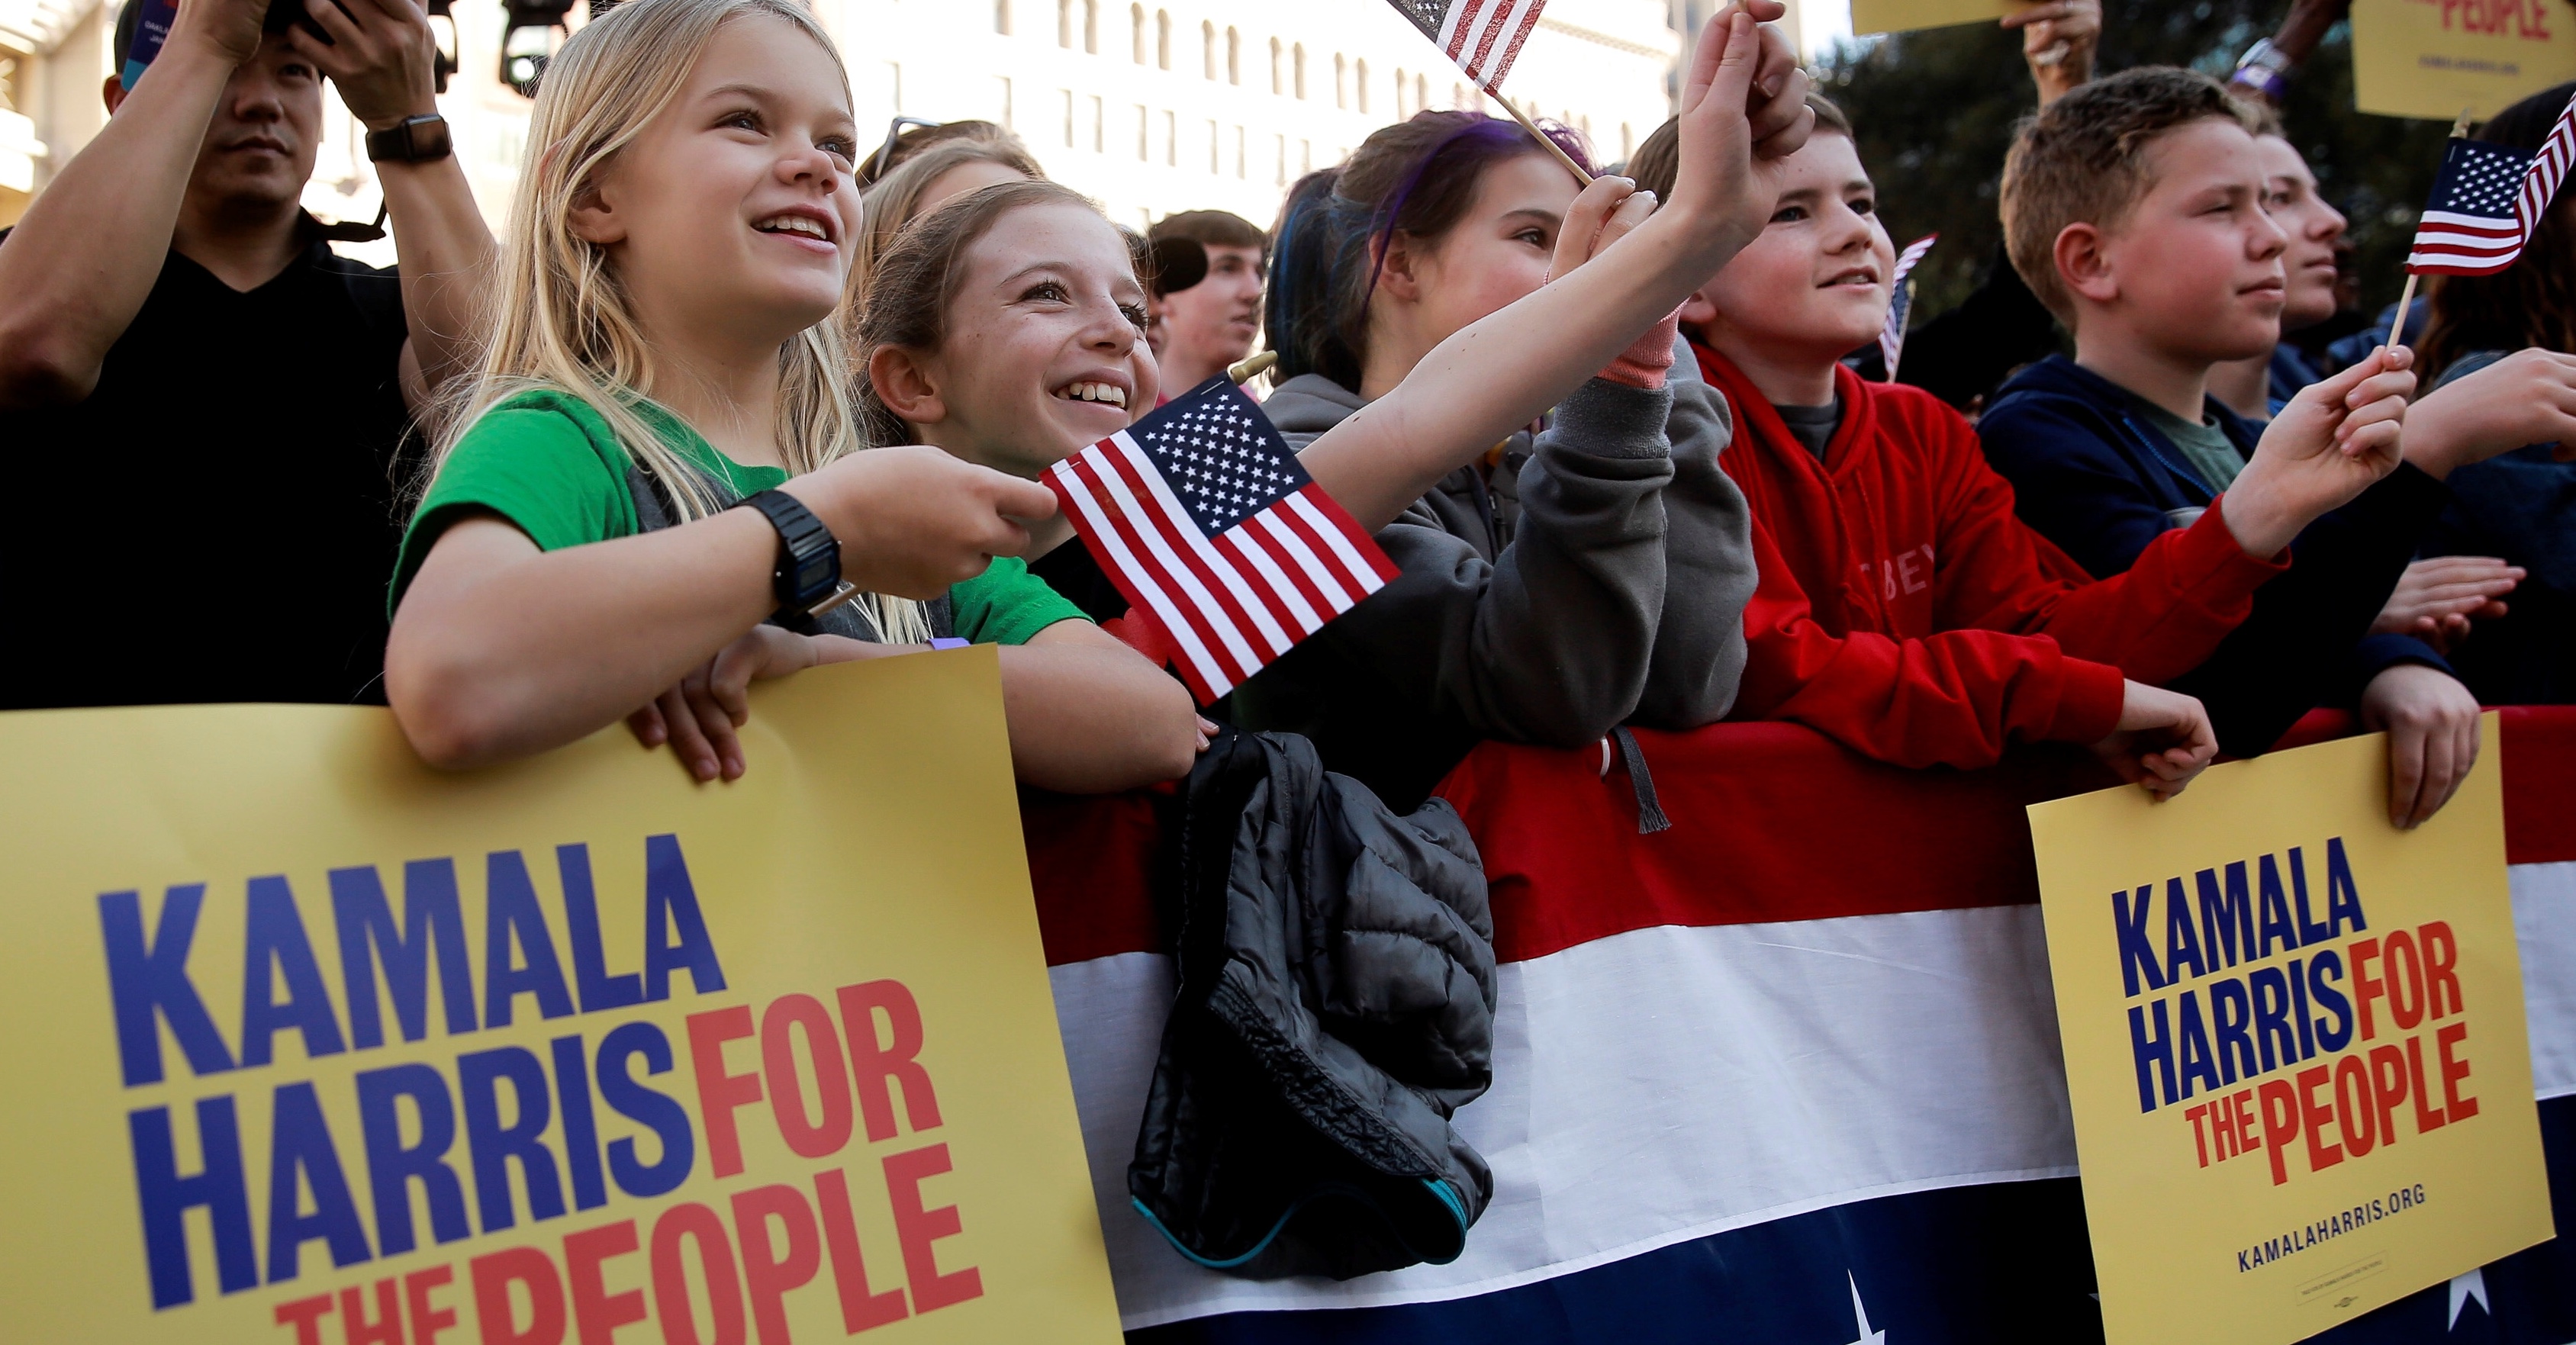 Nora Baedeker, 11, and Maggie Sinclair,12, listen to U.S. Senator Kamala Harris speak at the launch of her campaign for President of the United States at a rally at Frank H. Ogawa Plaza in her hometown of Oakland, California, U.S., January 27, 2019. REUTERS/Elijah Nouvelage - RC1A73D1B970